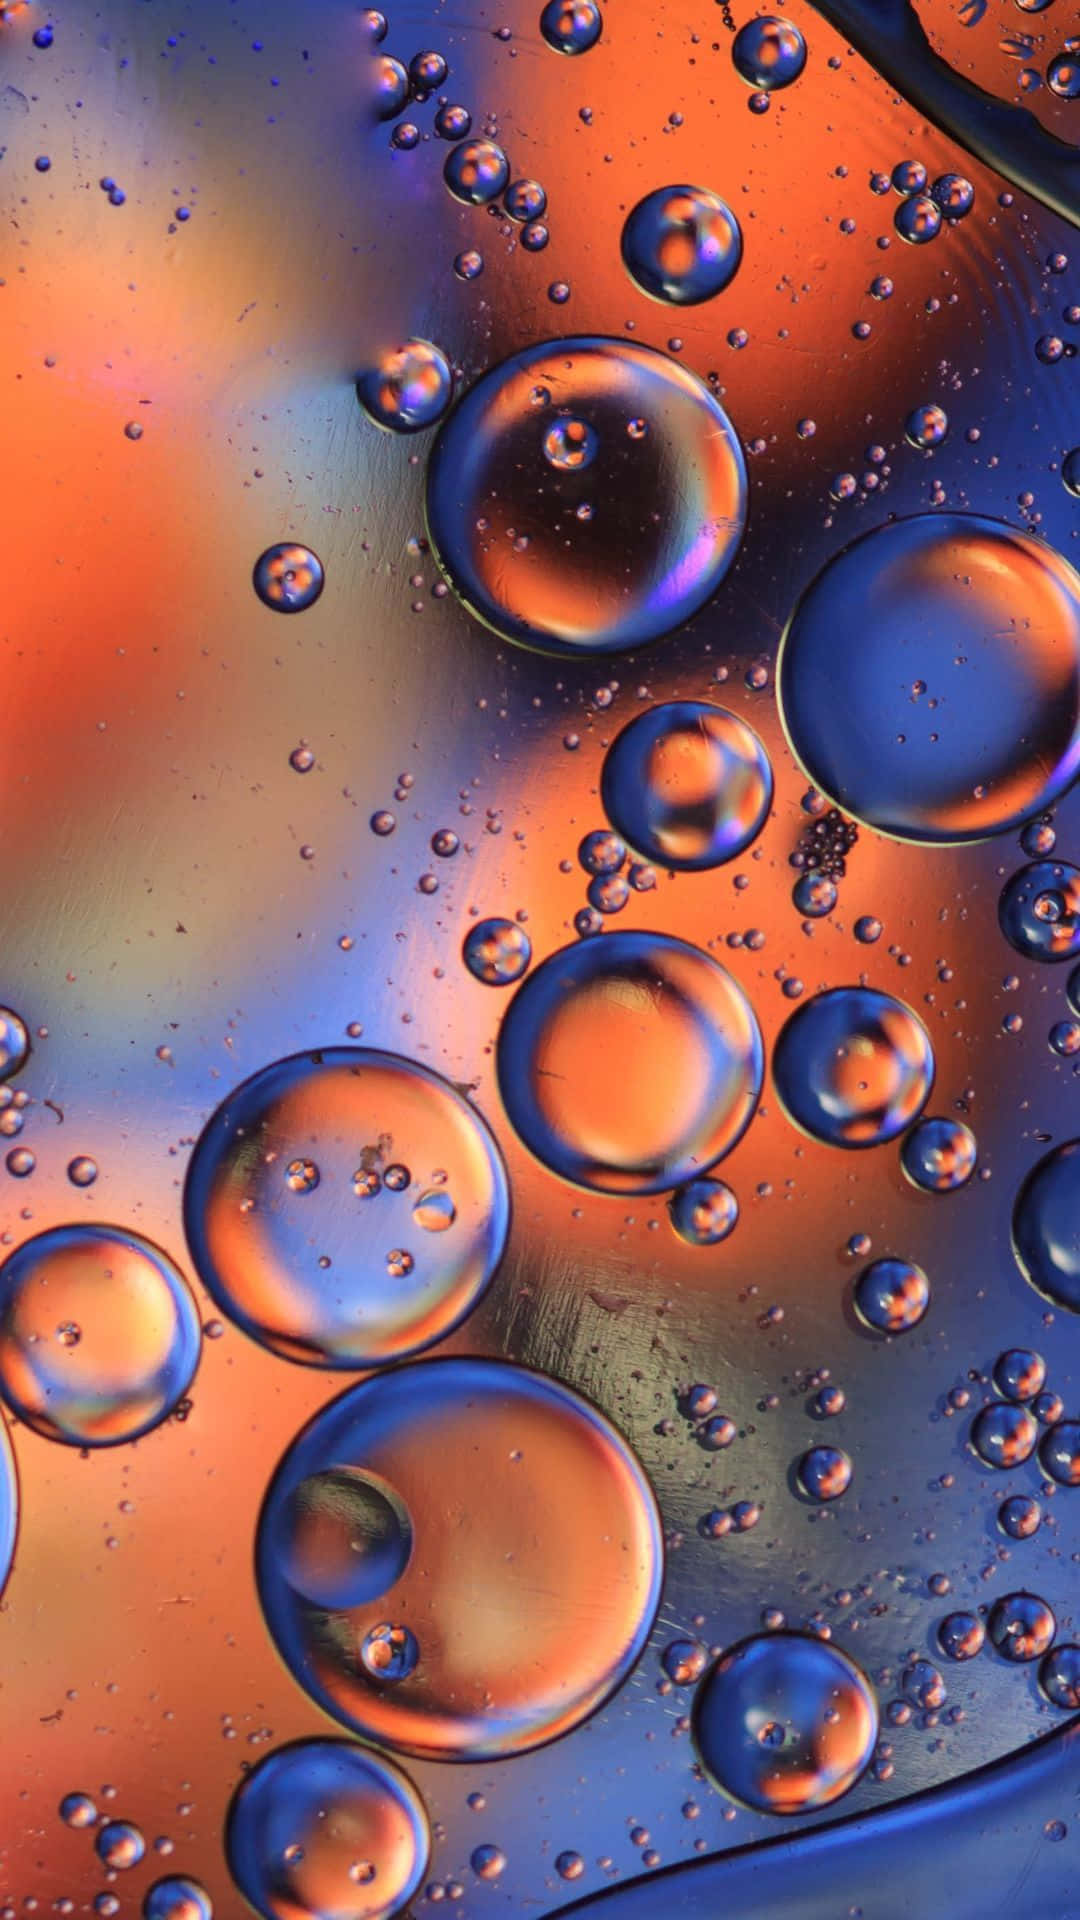 Unleash your creativity with the Bubbles Phone Wallpaper